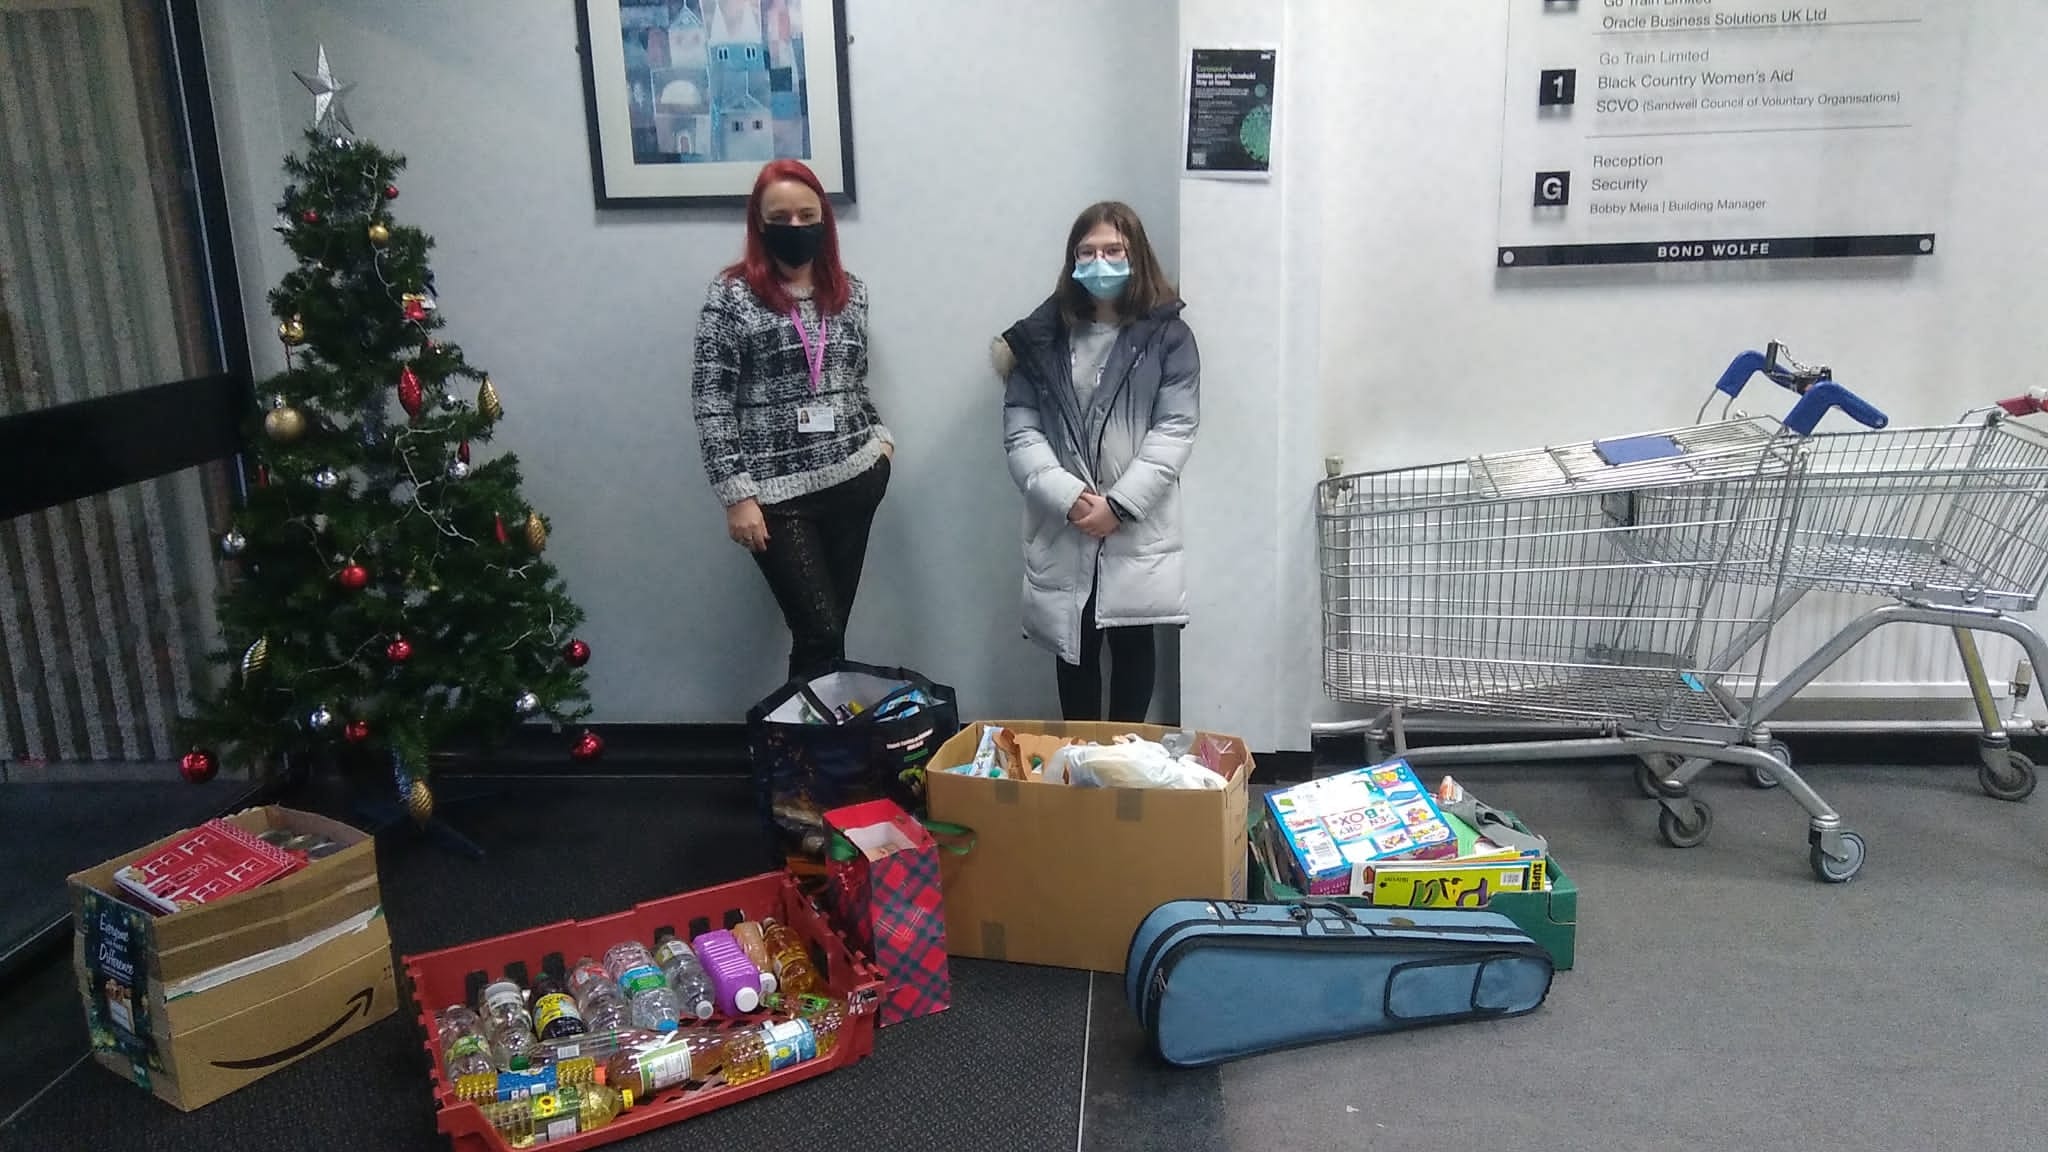 Final Collections & Donations for Toy Appeal